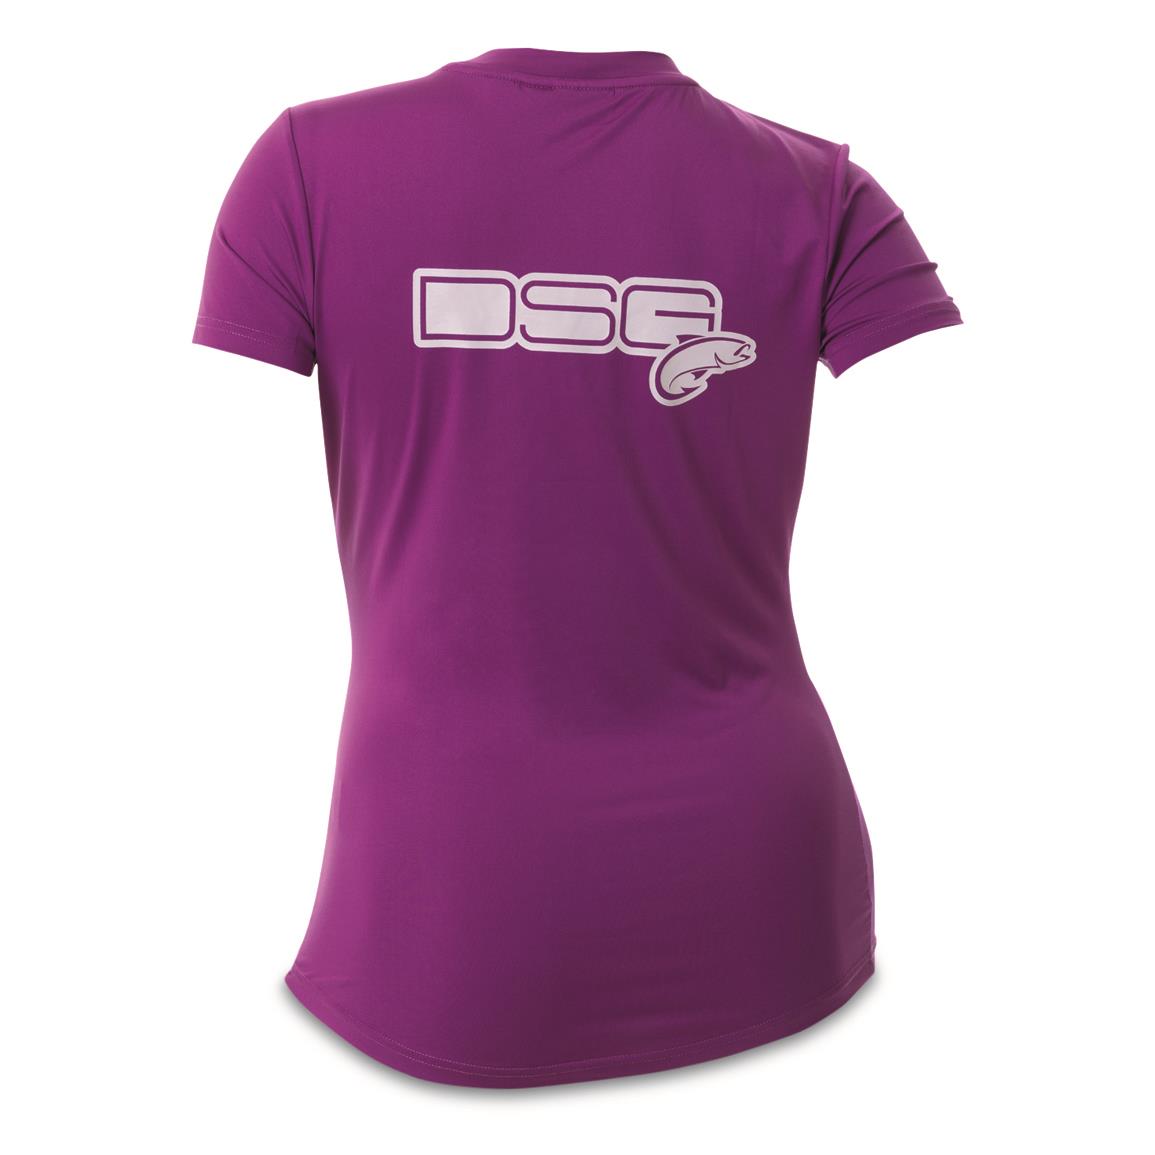 DSG Outerwear Women's Fitted Short-Sleeve Shirt, Orchid